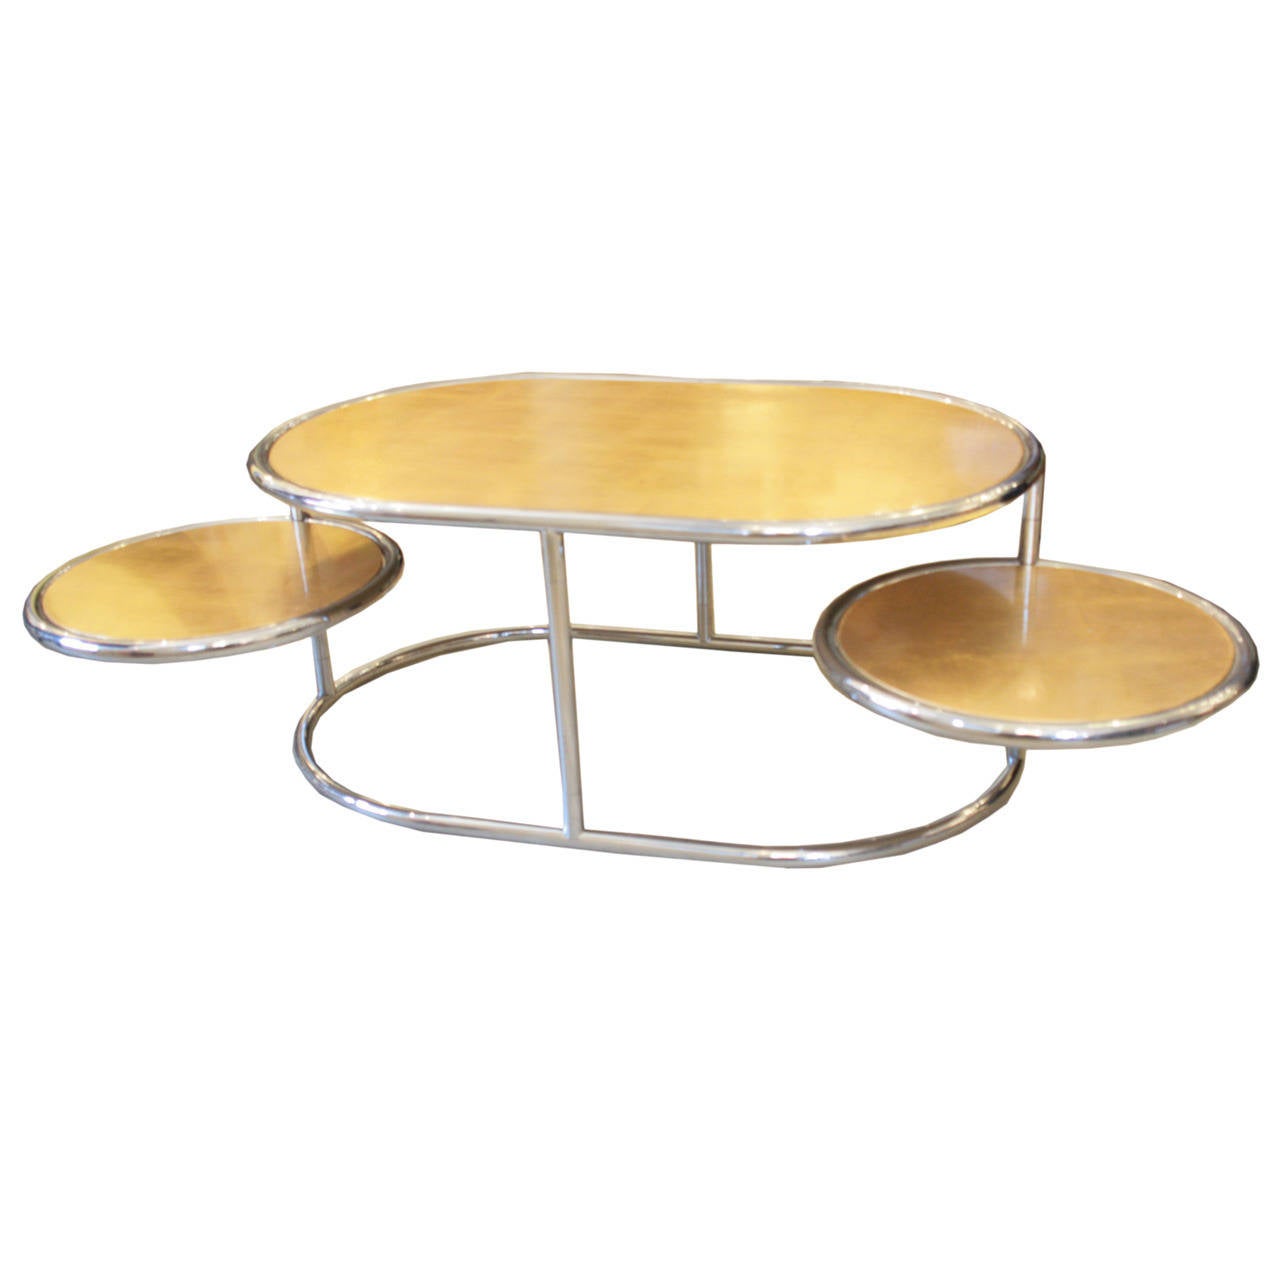 A 1970s folding coffee table For Sale